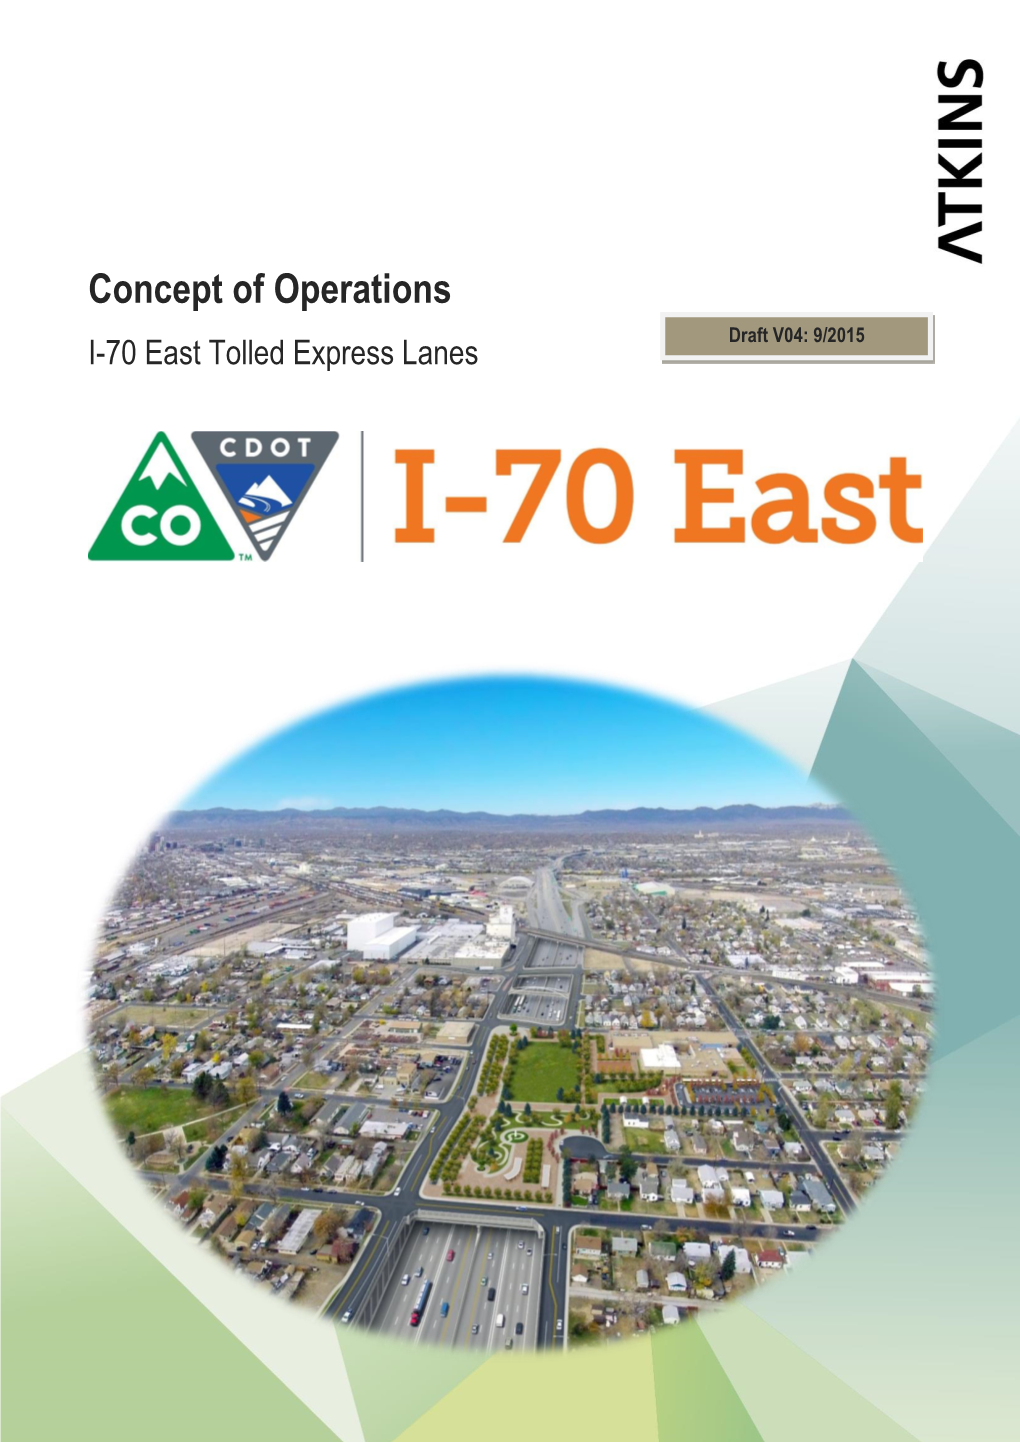 Concept of Operations Draft V04: 9/2015 I-70 East Tolled Express Lanes